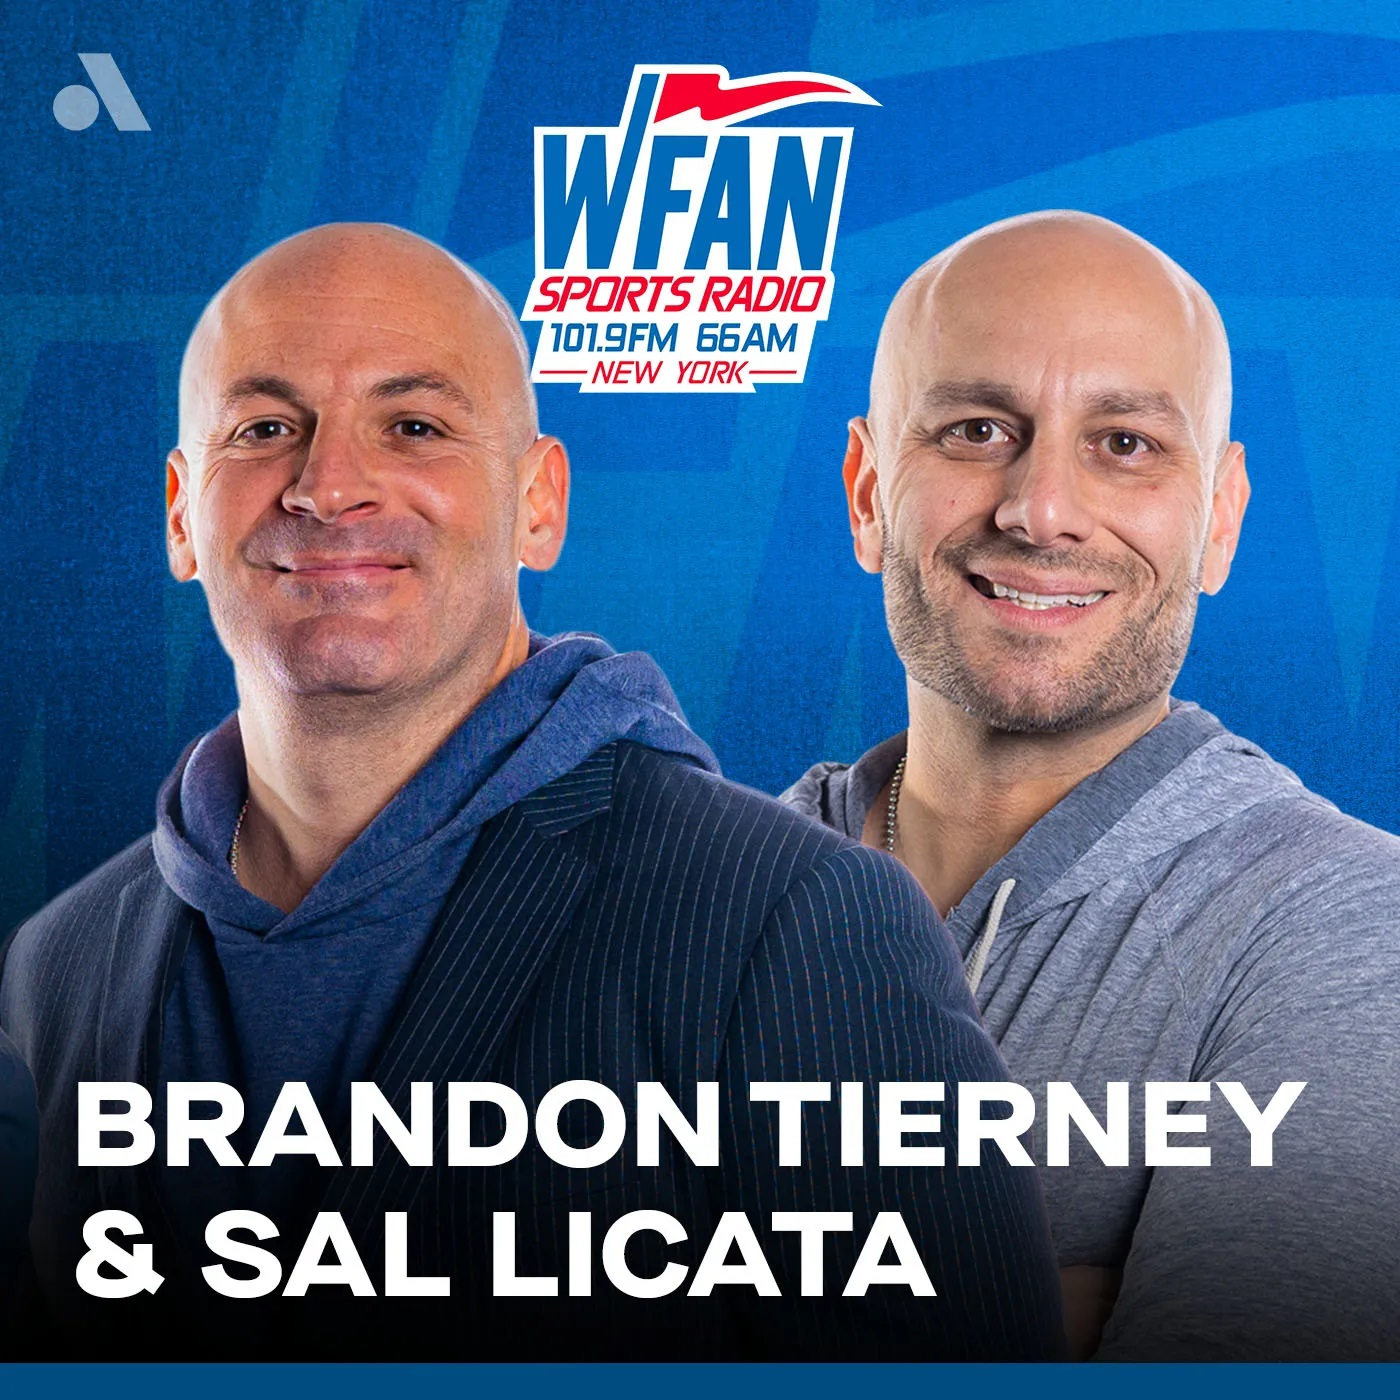 WFAN Play By Play